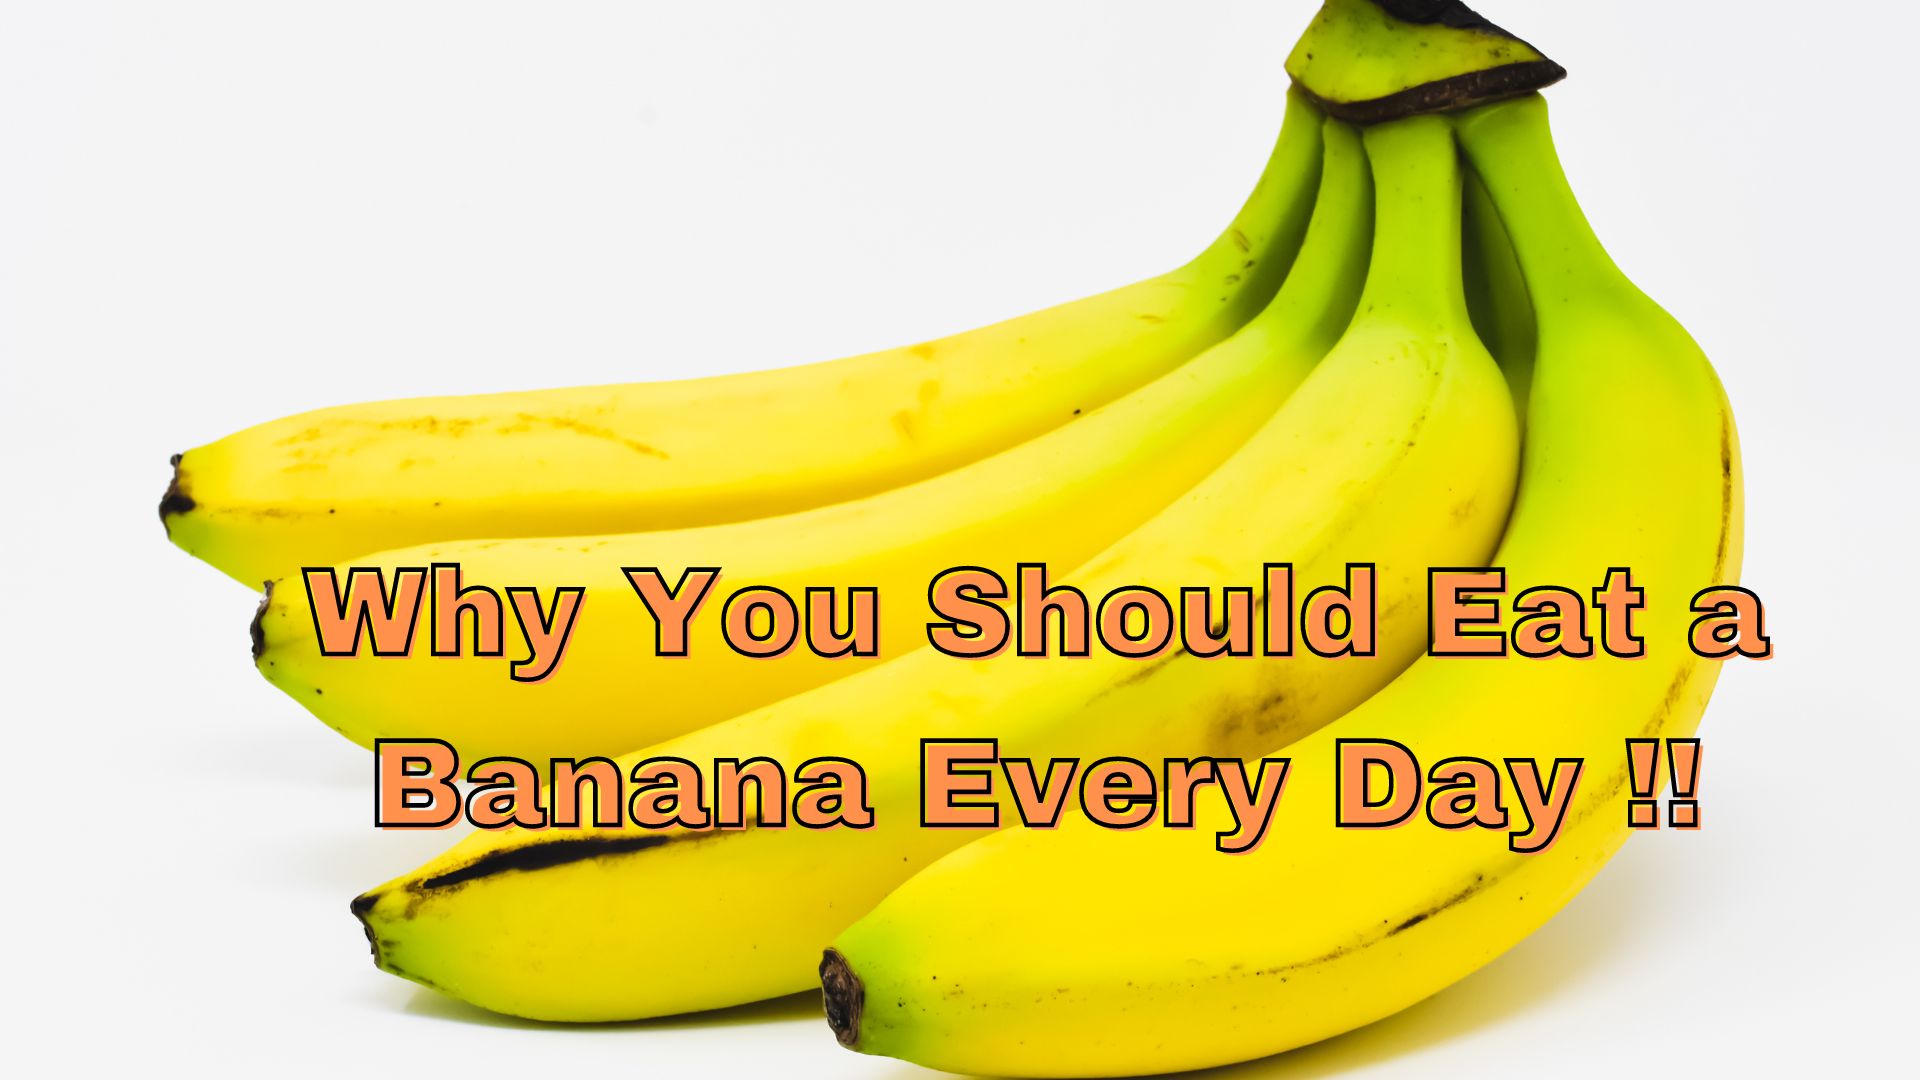 Why You Should Eat a Banana Every Day !!